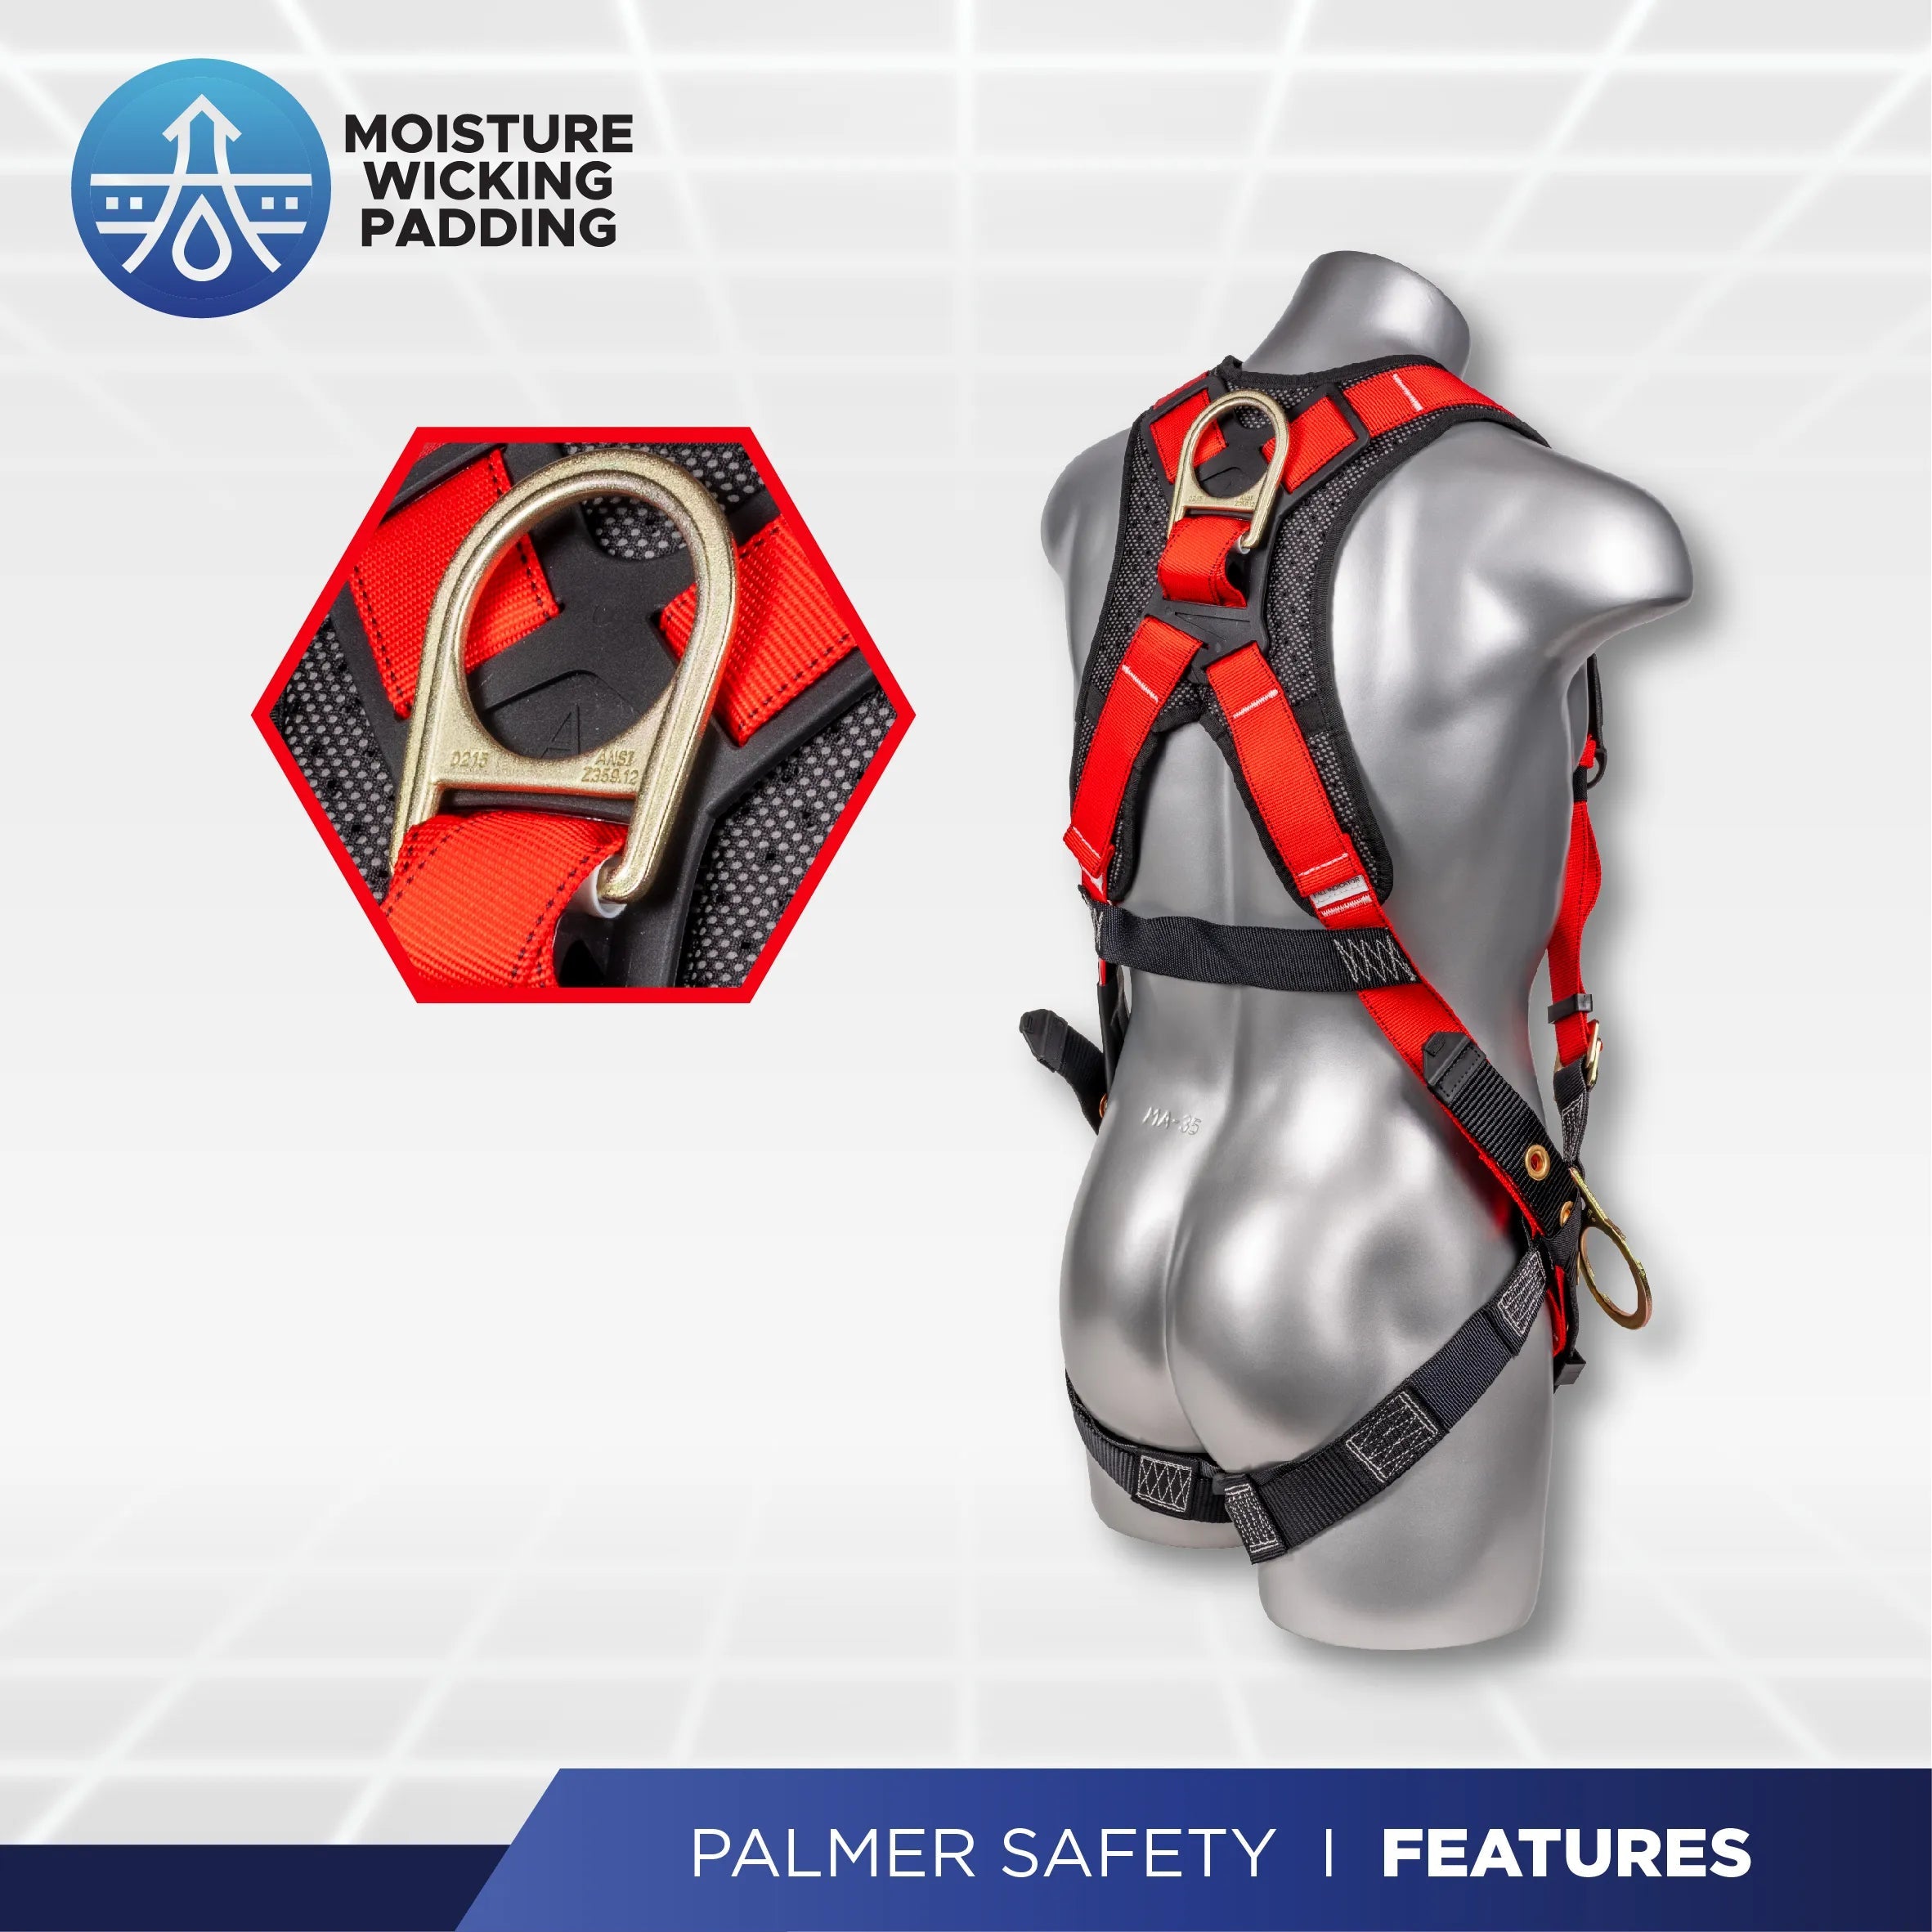 Construction Safety Harness 5 Point, Grommet Legs, Padded Back, Red - Defender Safety